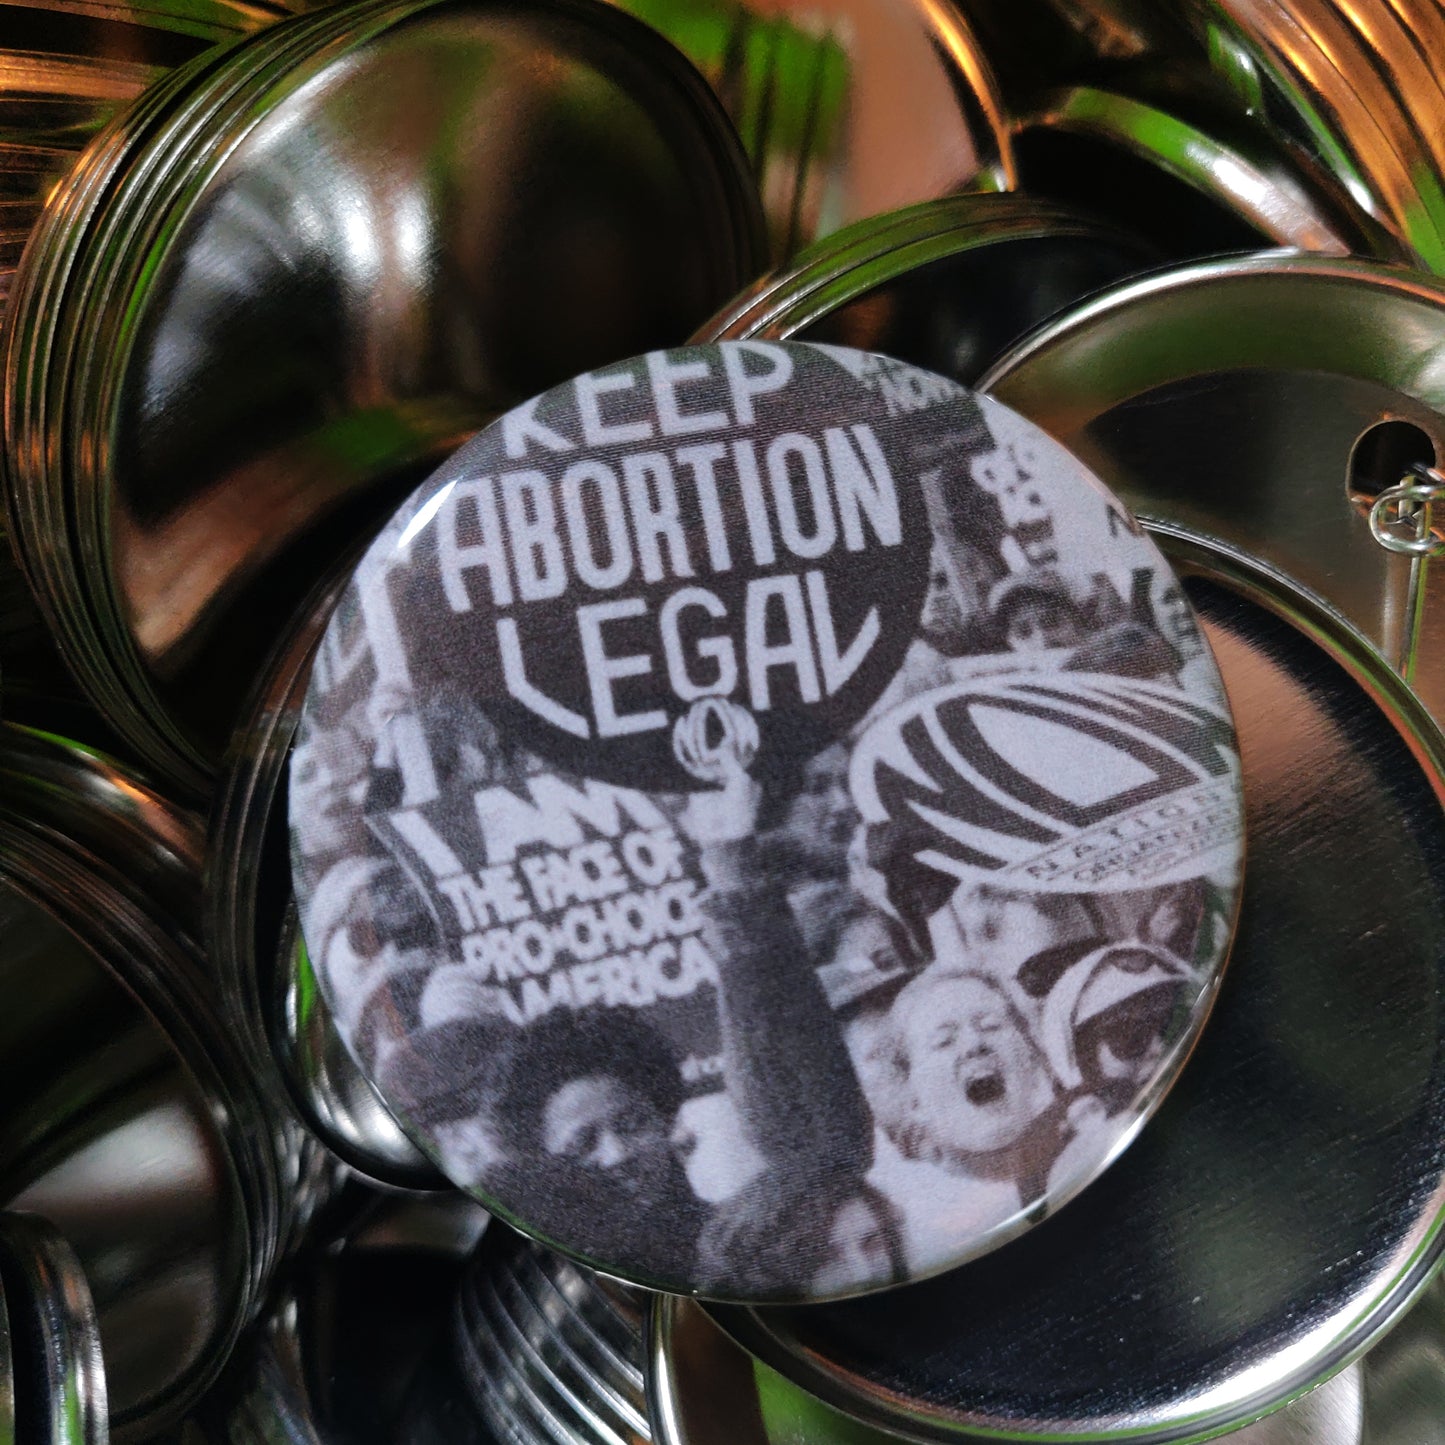 Keep Abortion Legal b&w Pin DONATION to Abortion Liberation Fund of PA